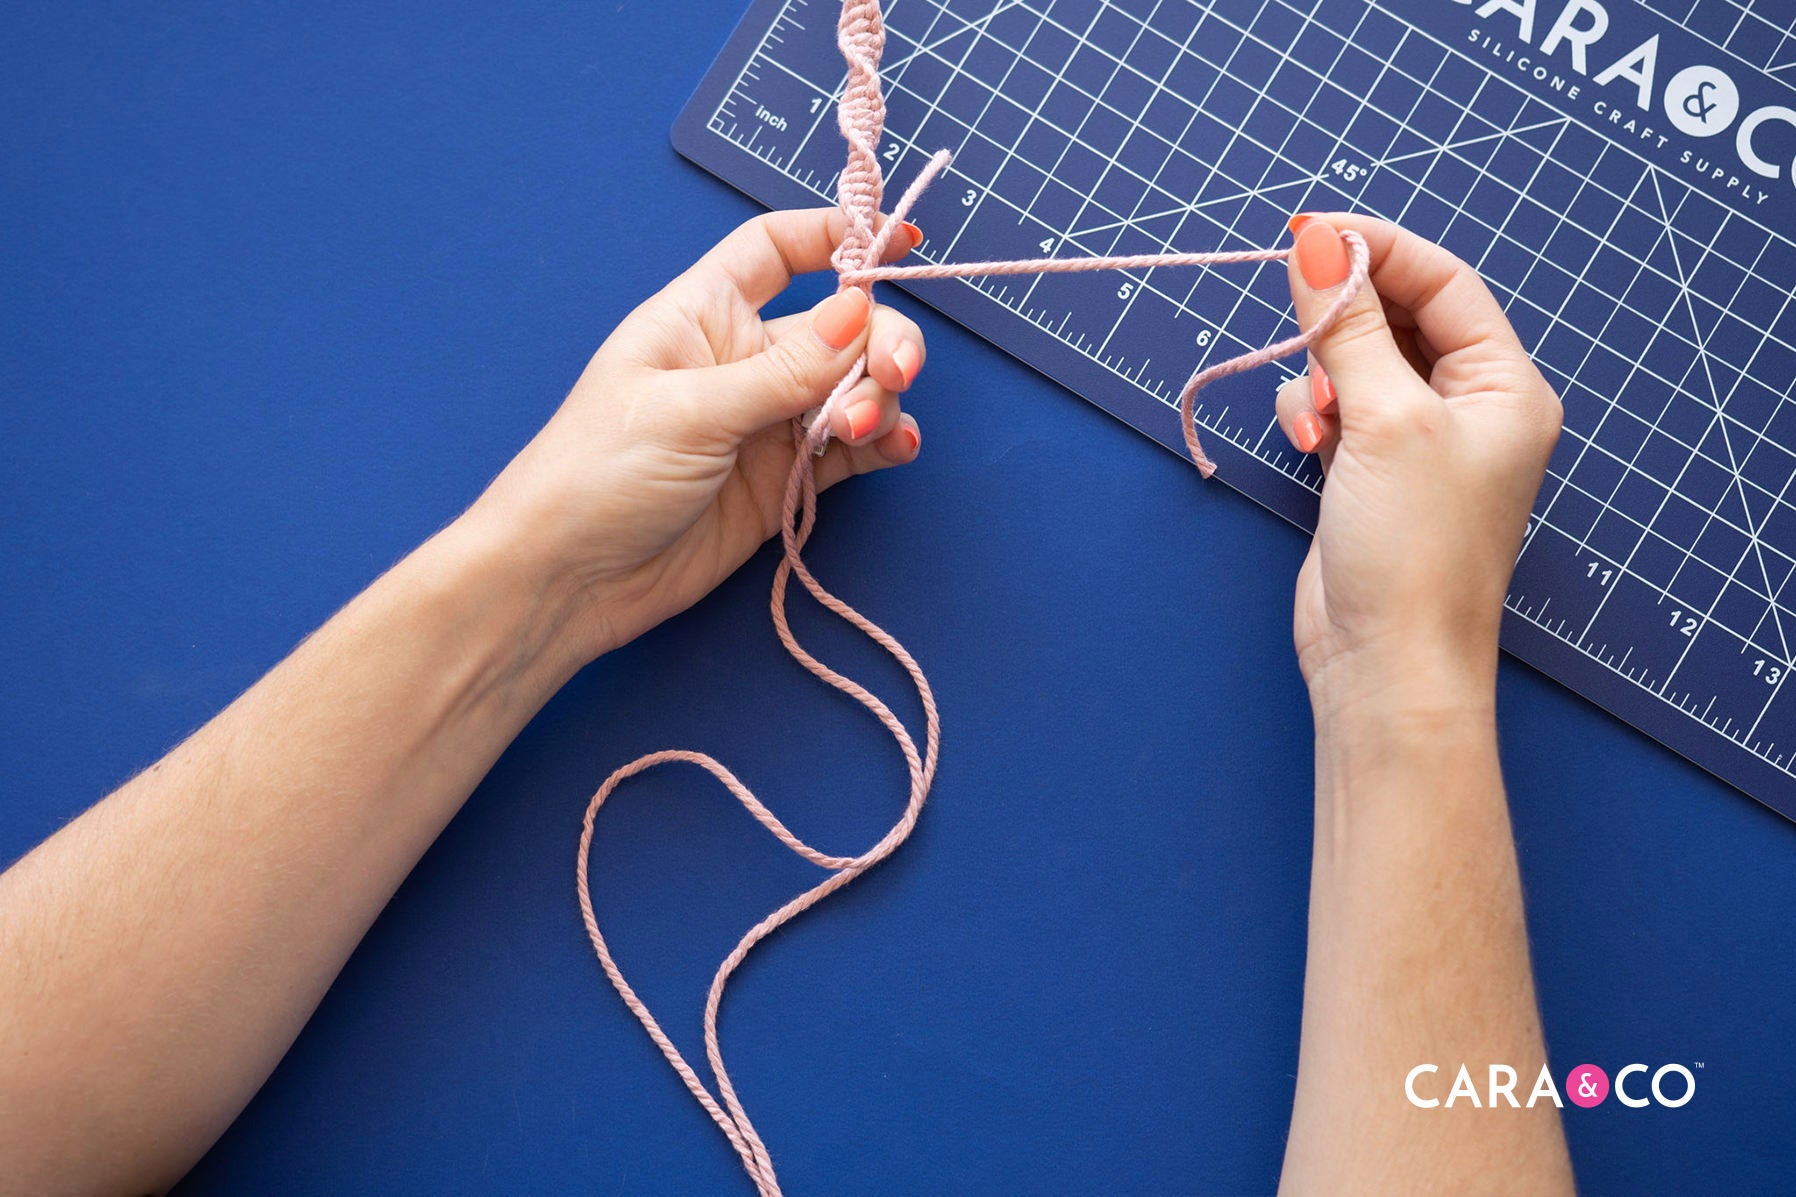 Easy macrame crafts - DIY phone charger cord